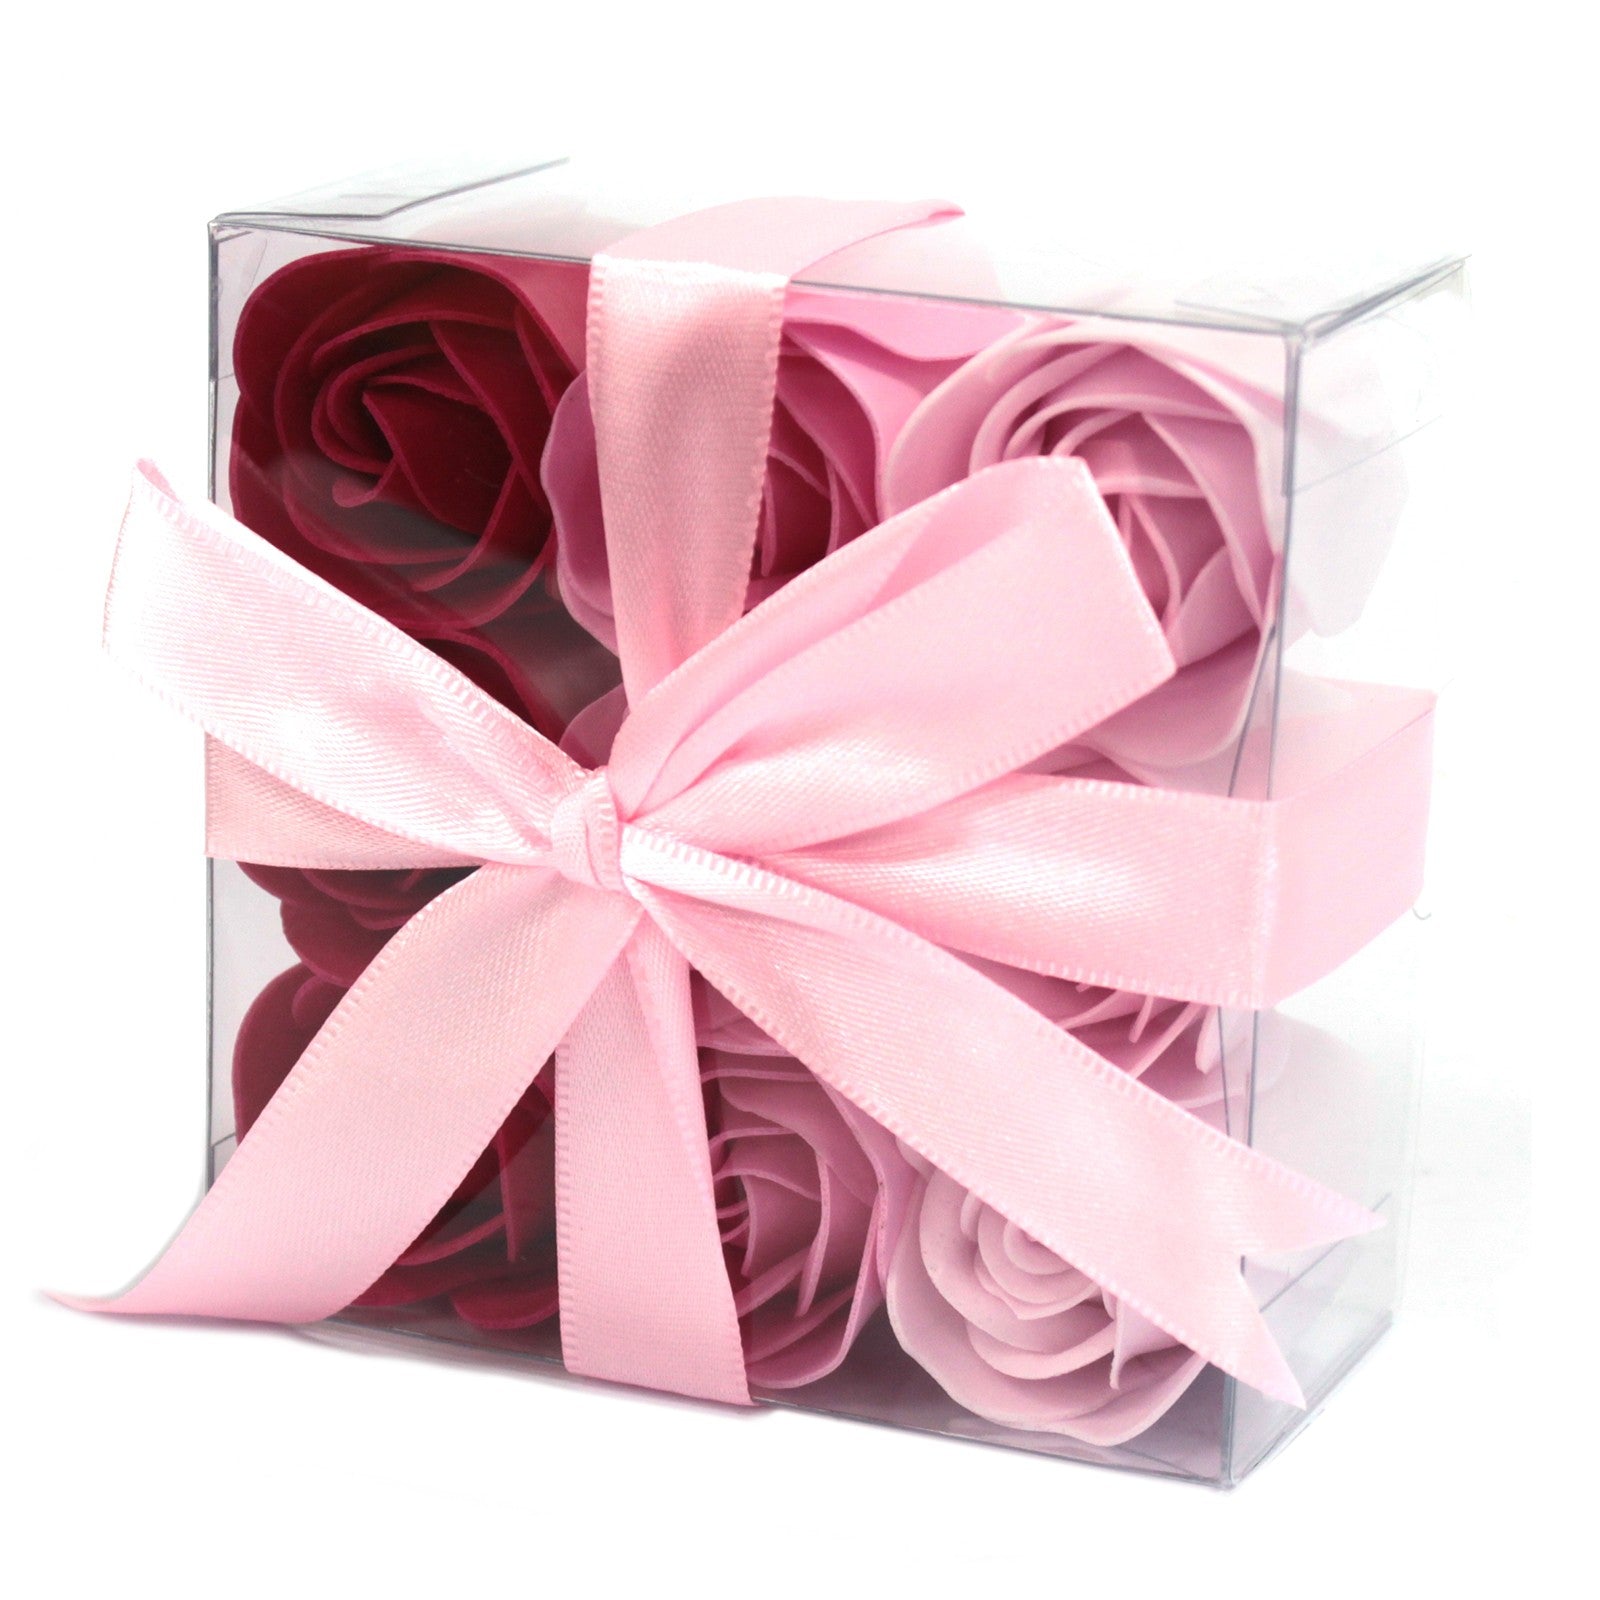 Set of 9 Soap Flowers - Pink Roses - Ultrabee